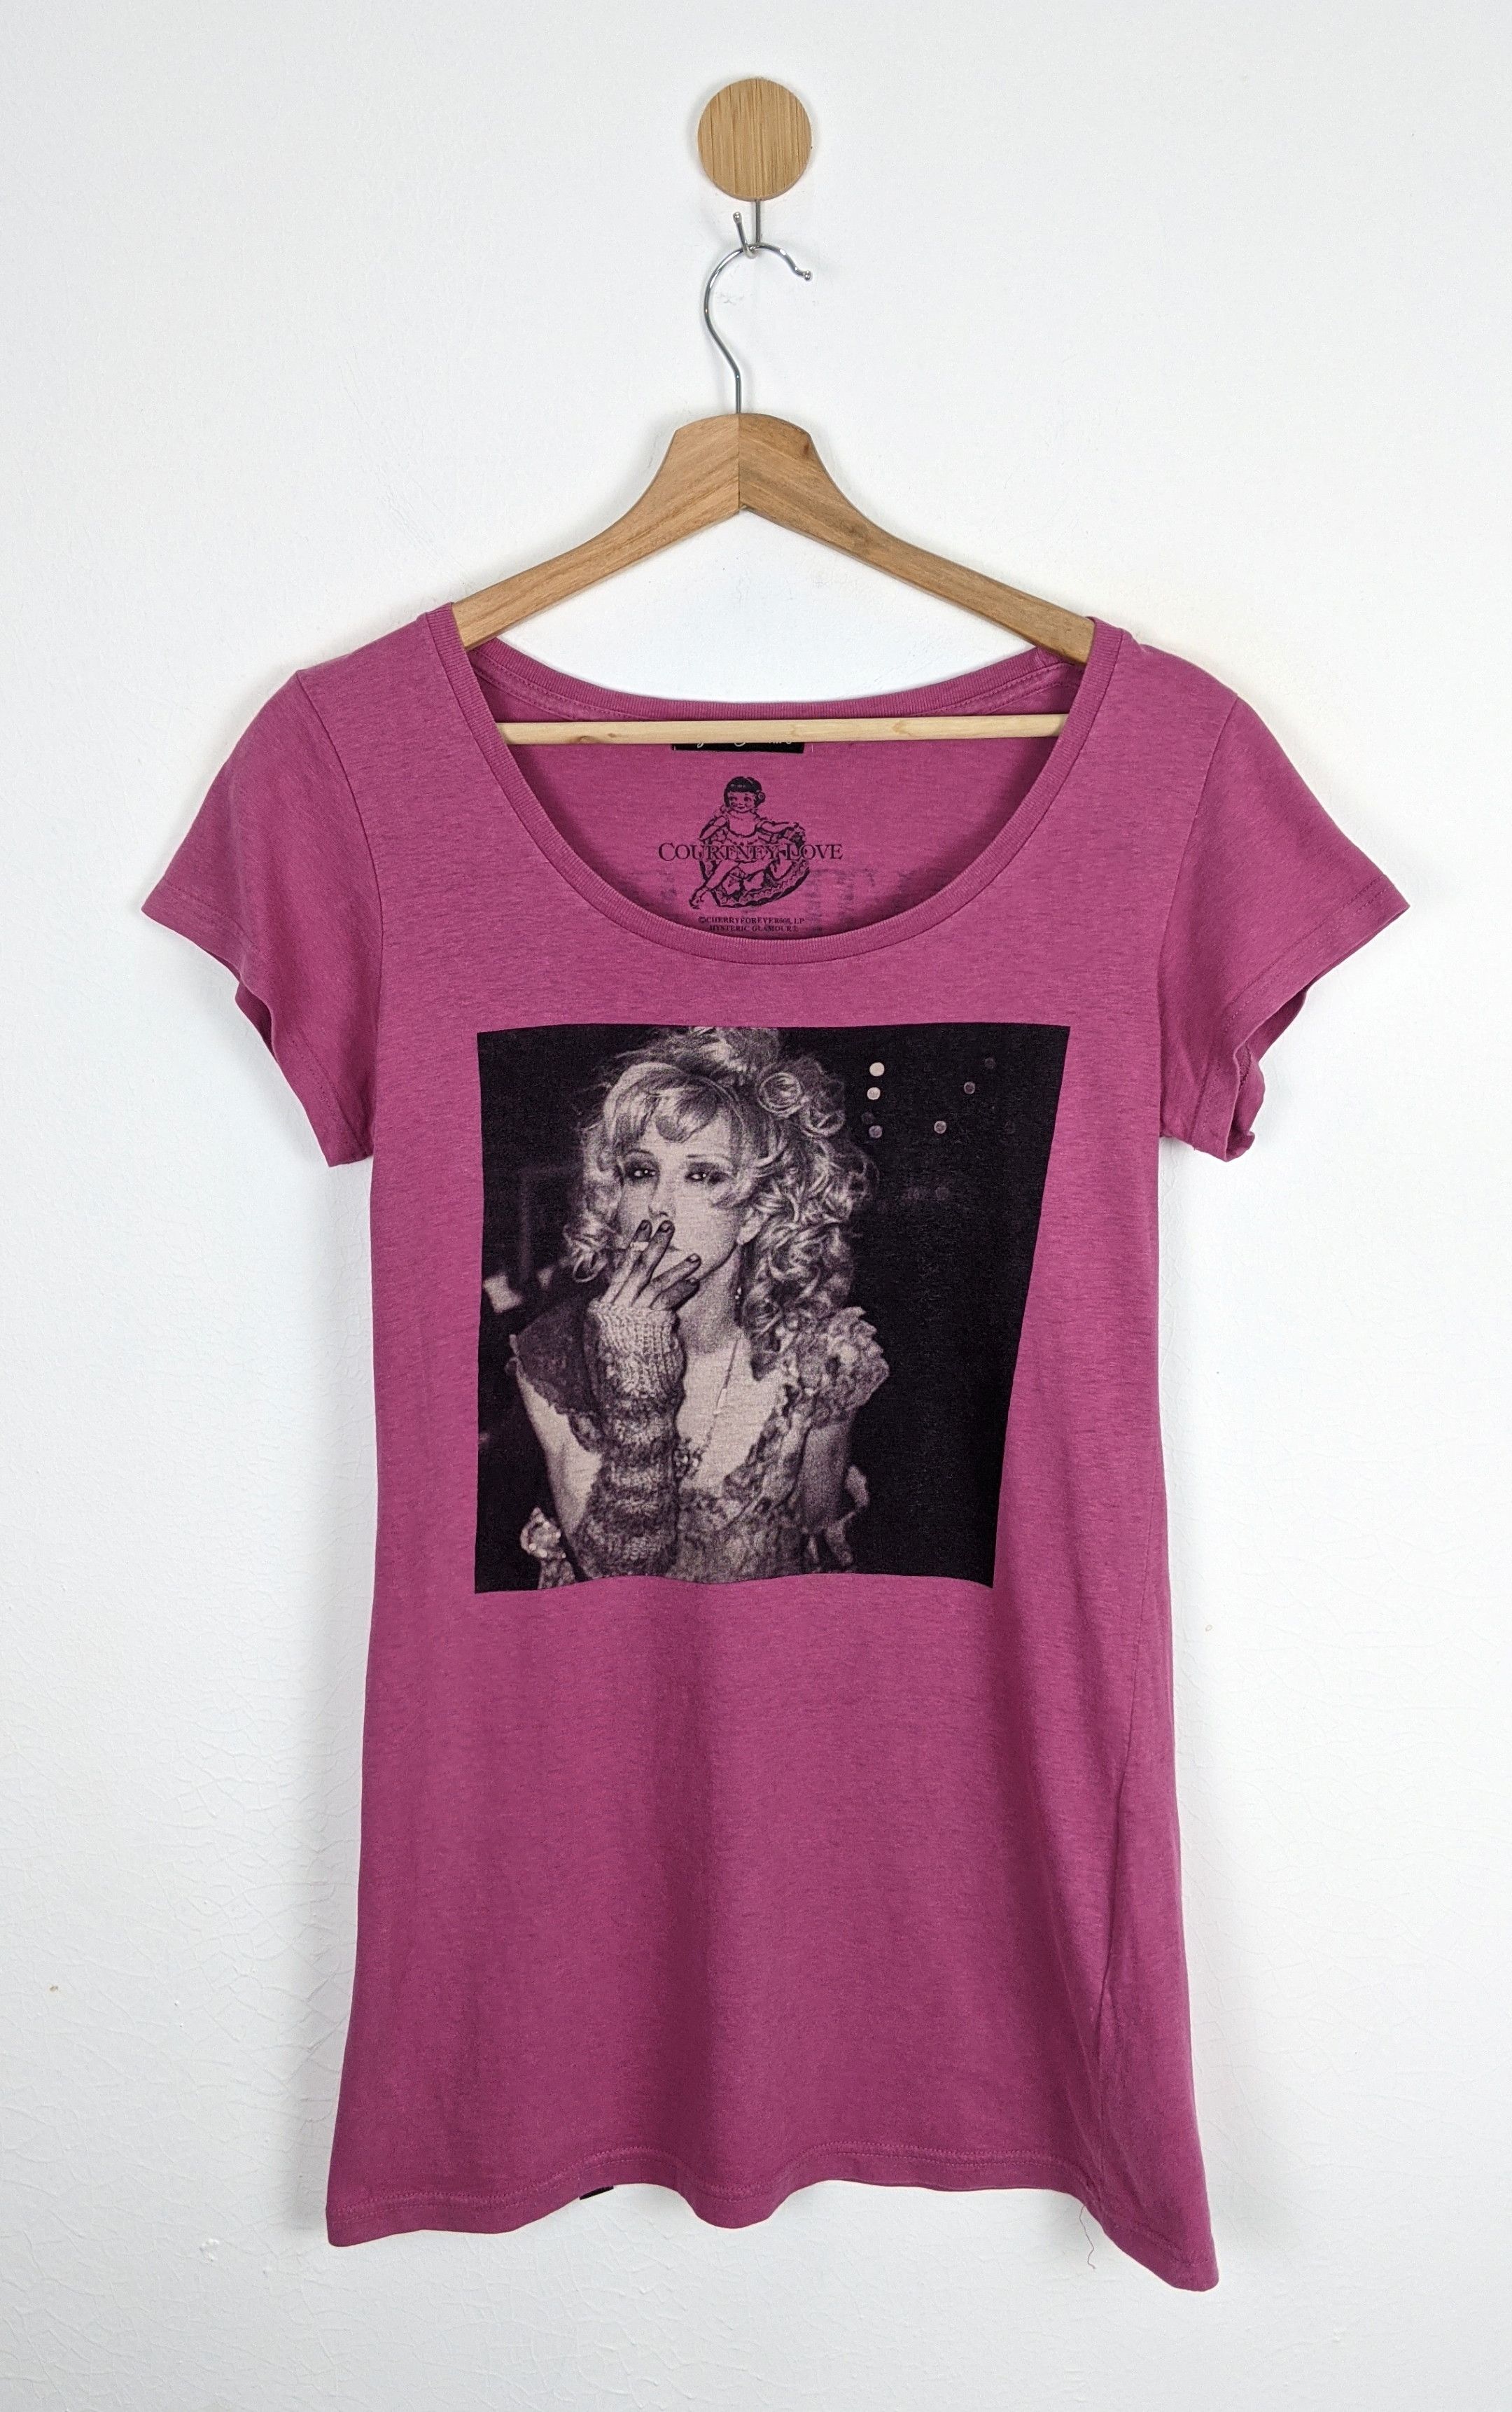 Hysteric Glamour x Courtney Love Hole I Will be Swan shirt - 1